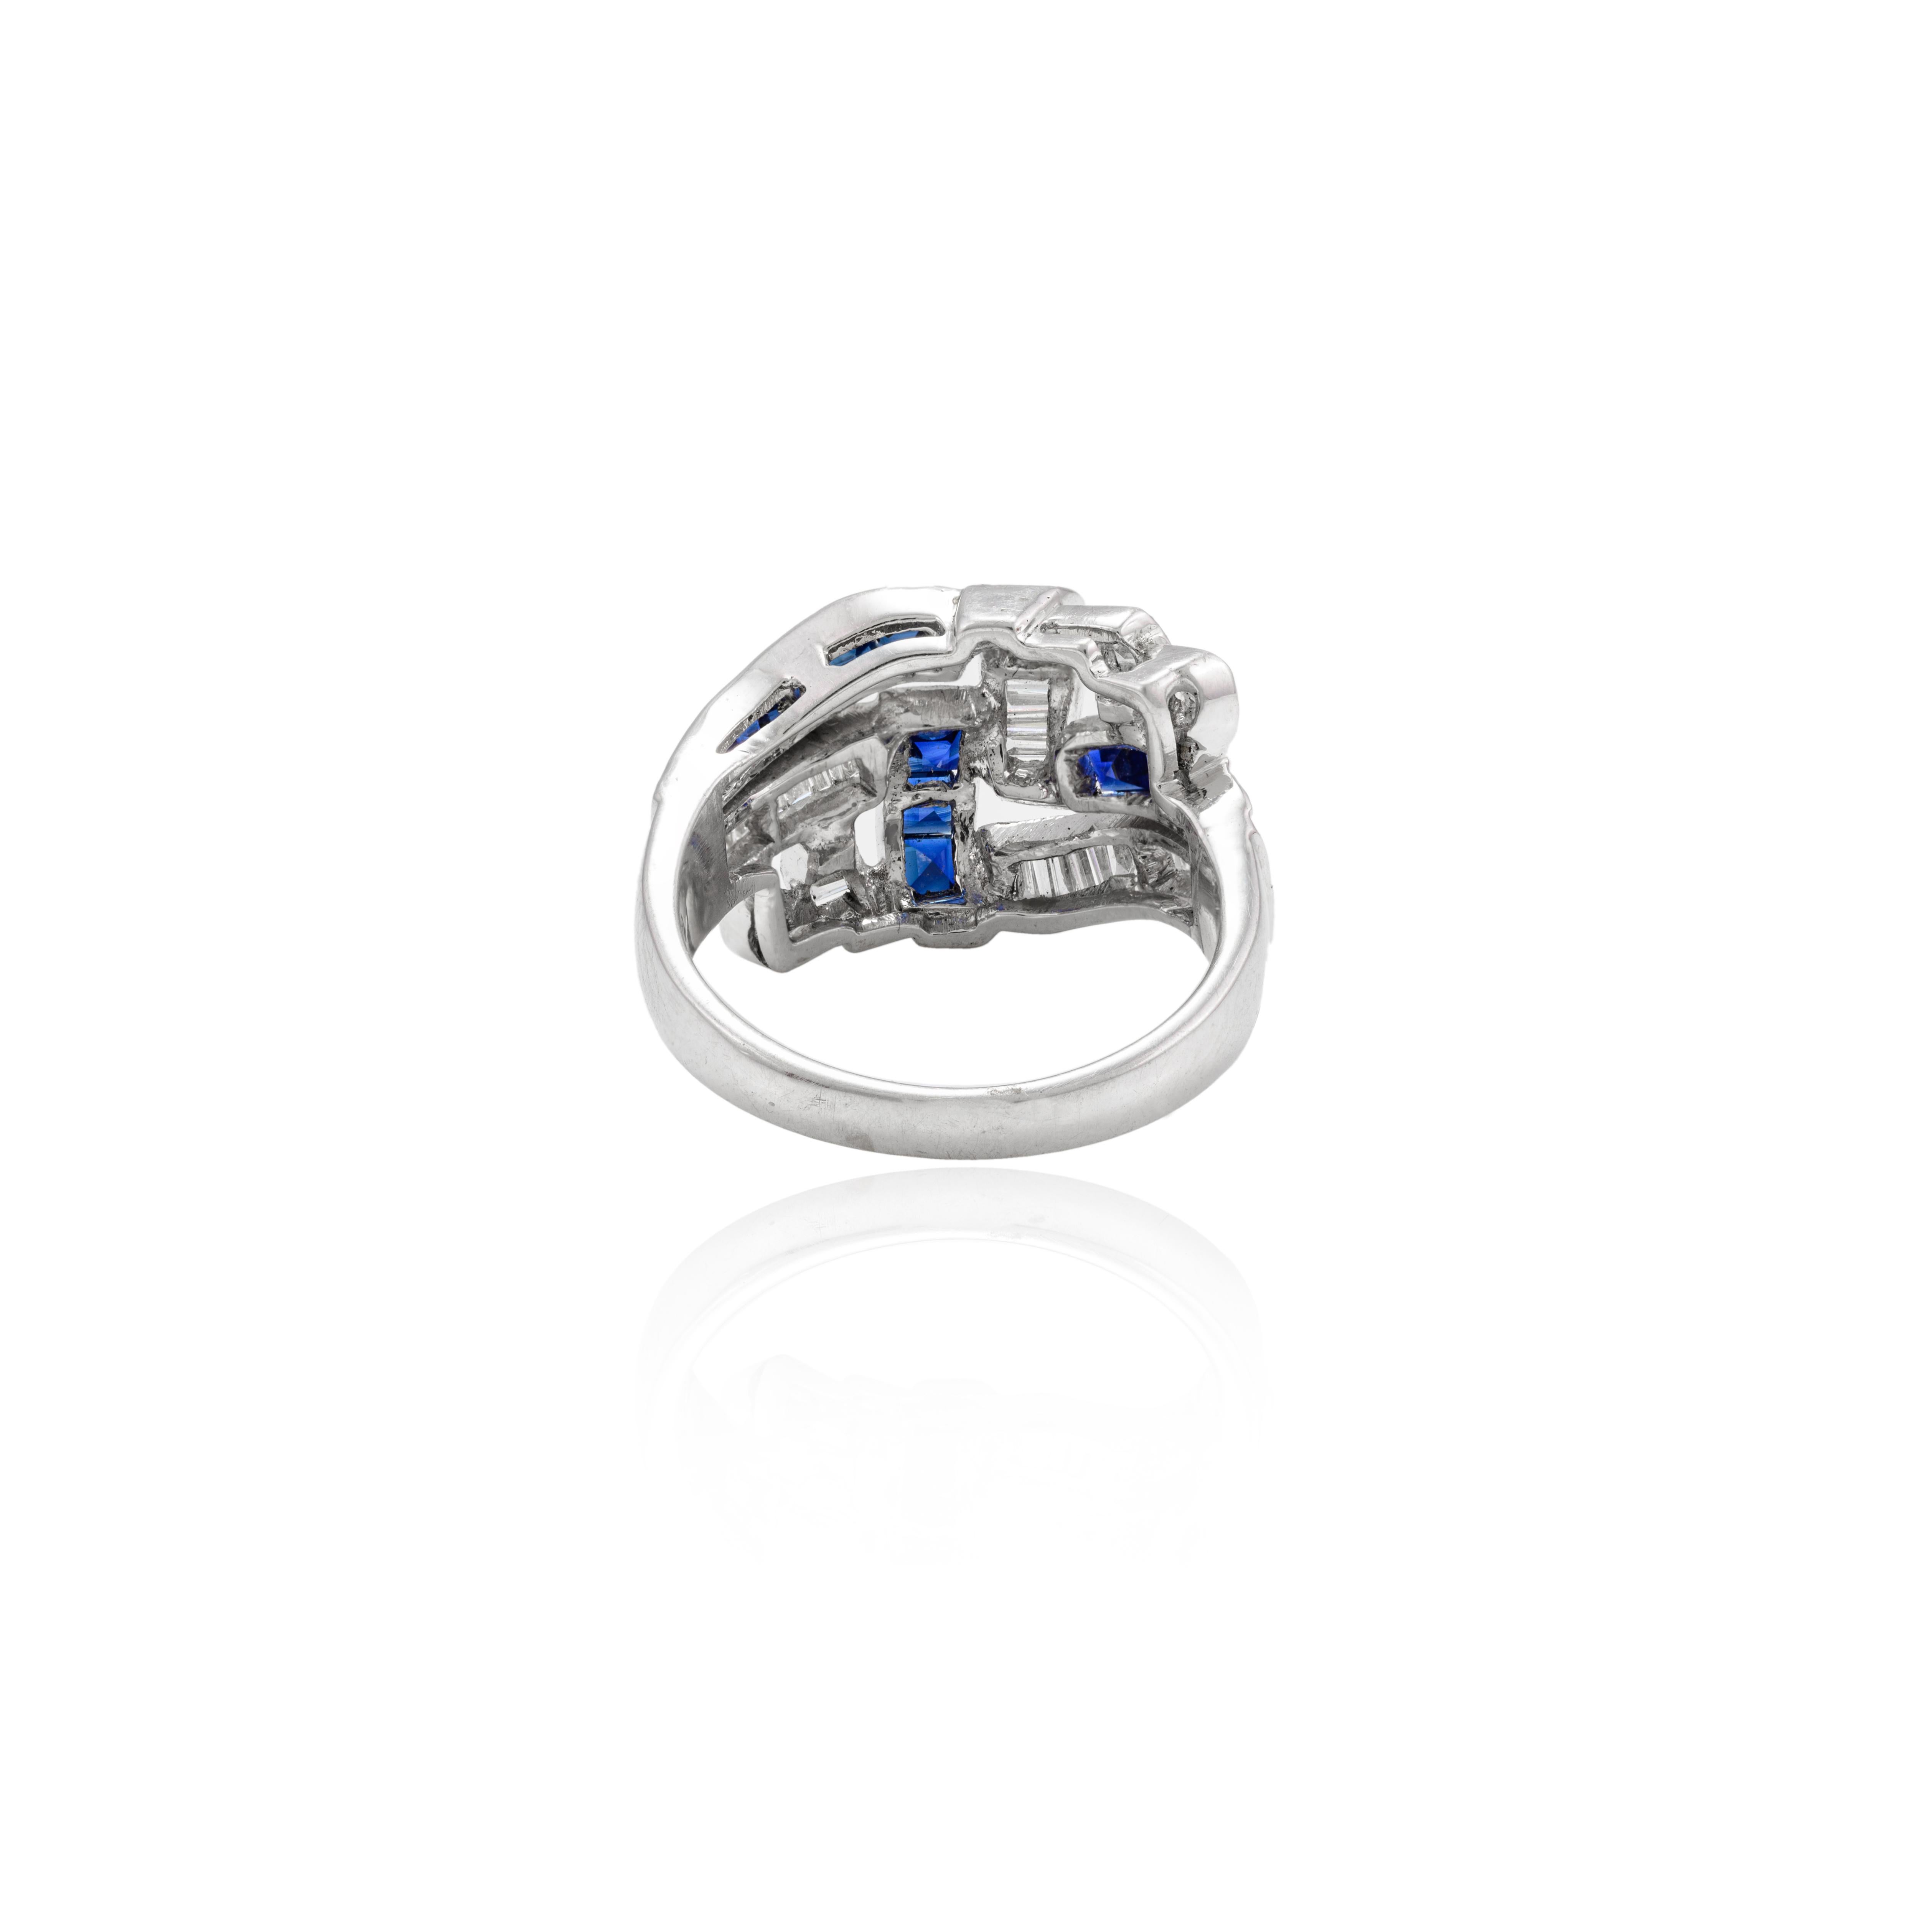 For Sale:  Art Deco 1.3 Carat Blue Sapphire and Diamond Ring in 18k Solid White Gold 4